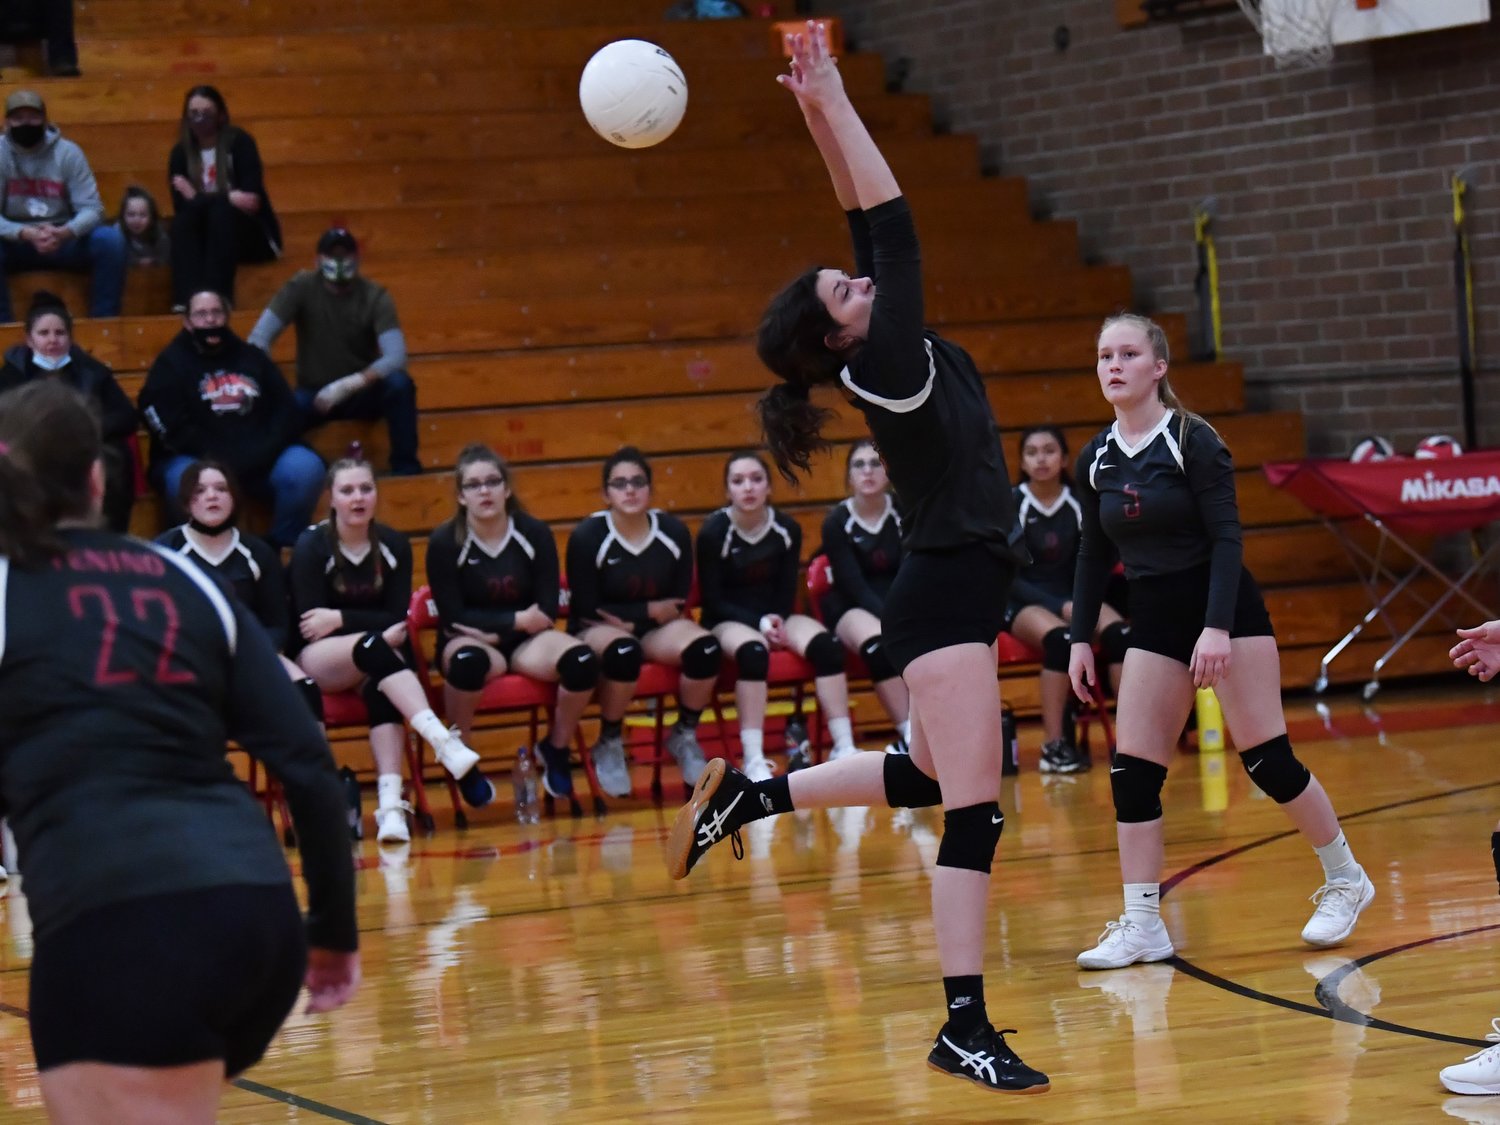 Tenino senior Brittany Maynard keeps a ball alive in a loss to Castle Rock in the opening round of the 1A District 4 playoffs Nov. 3.